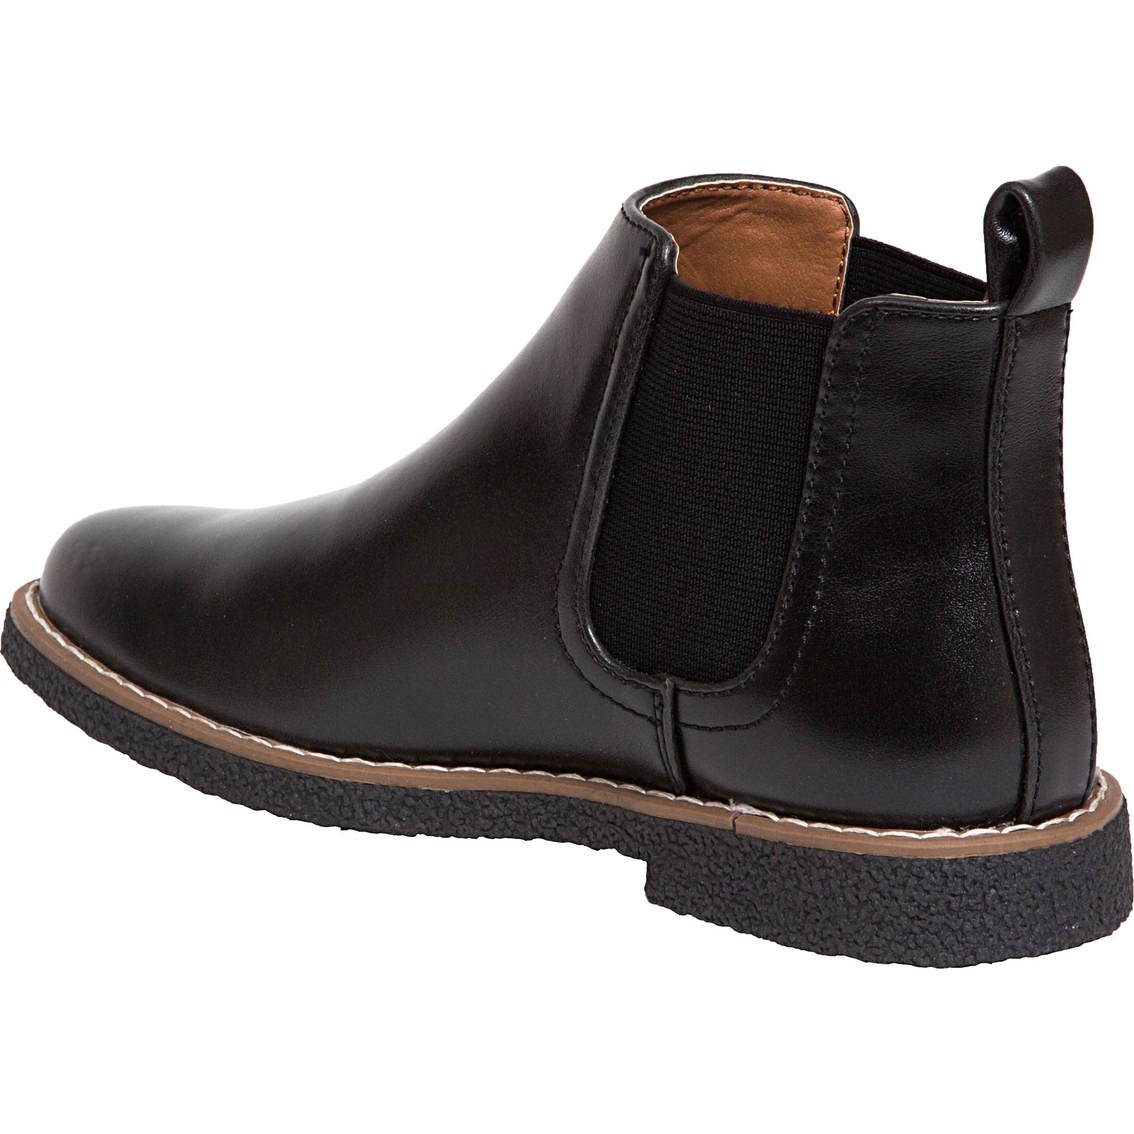 Deer Stags Boys Zane Dress Boots - Image 2 of 8